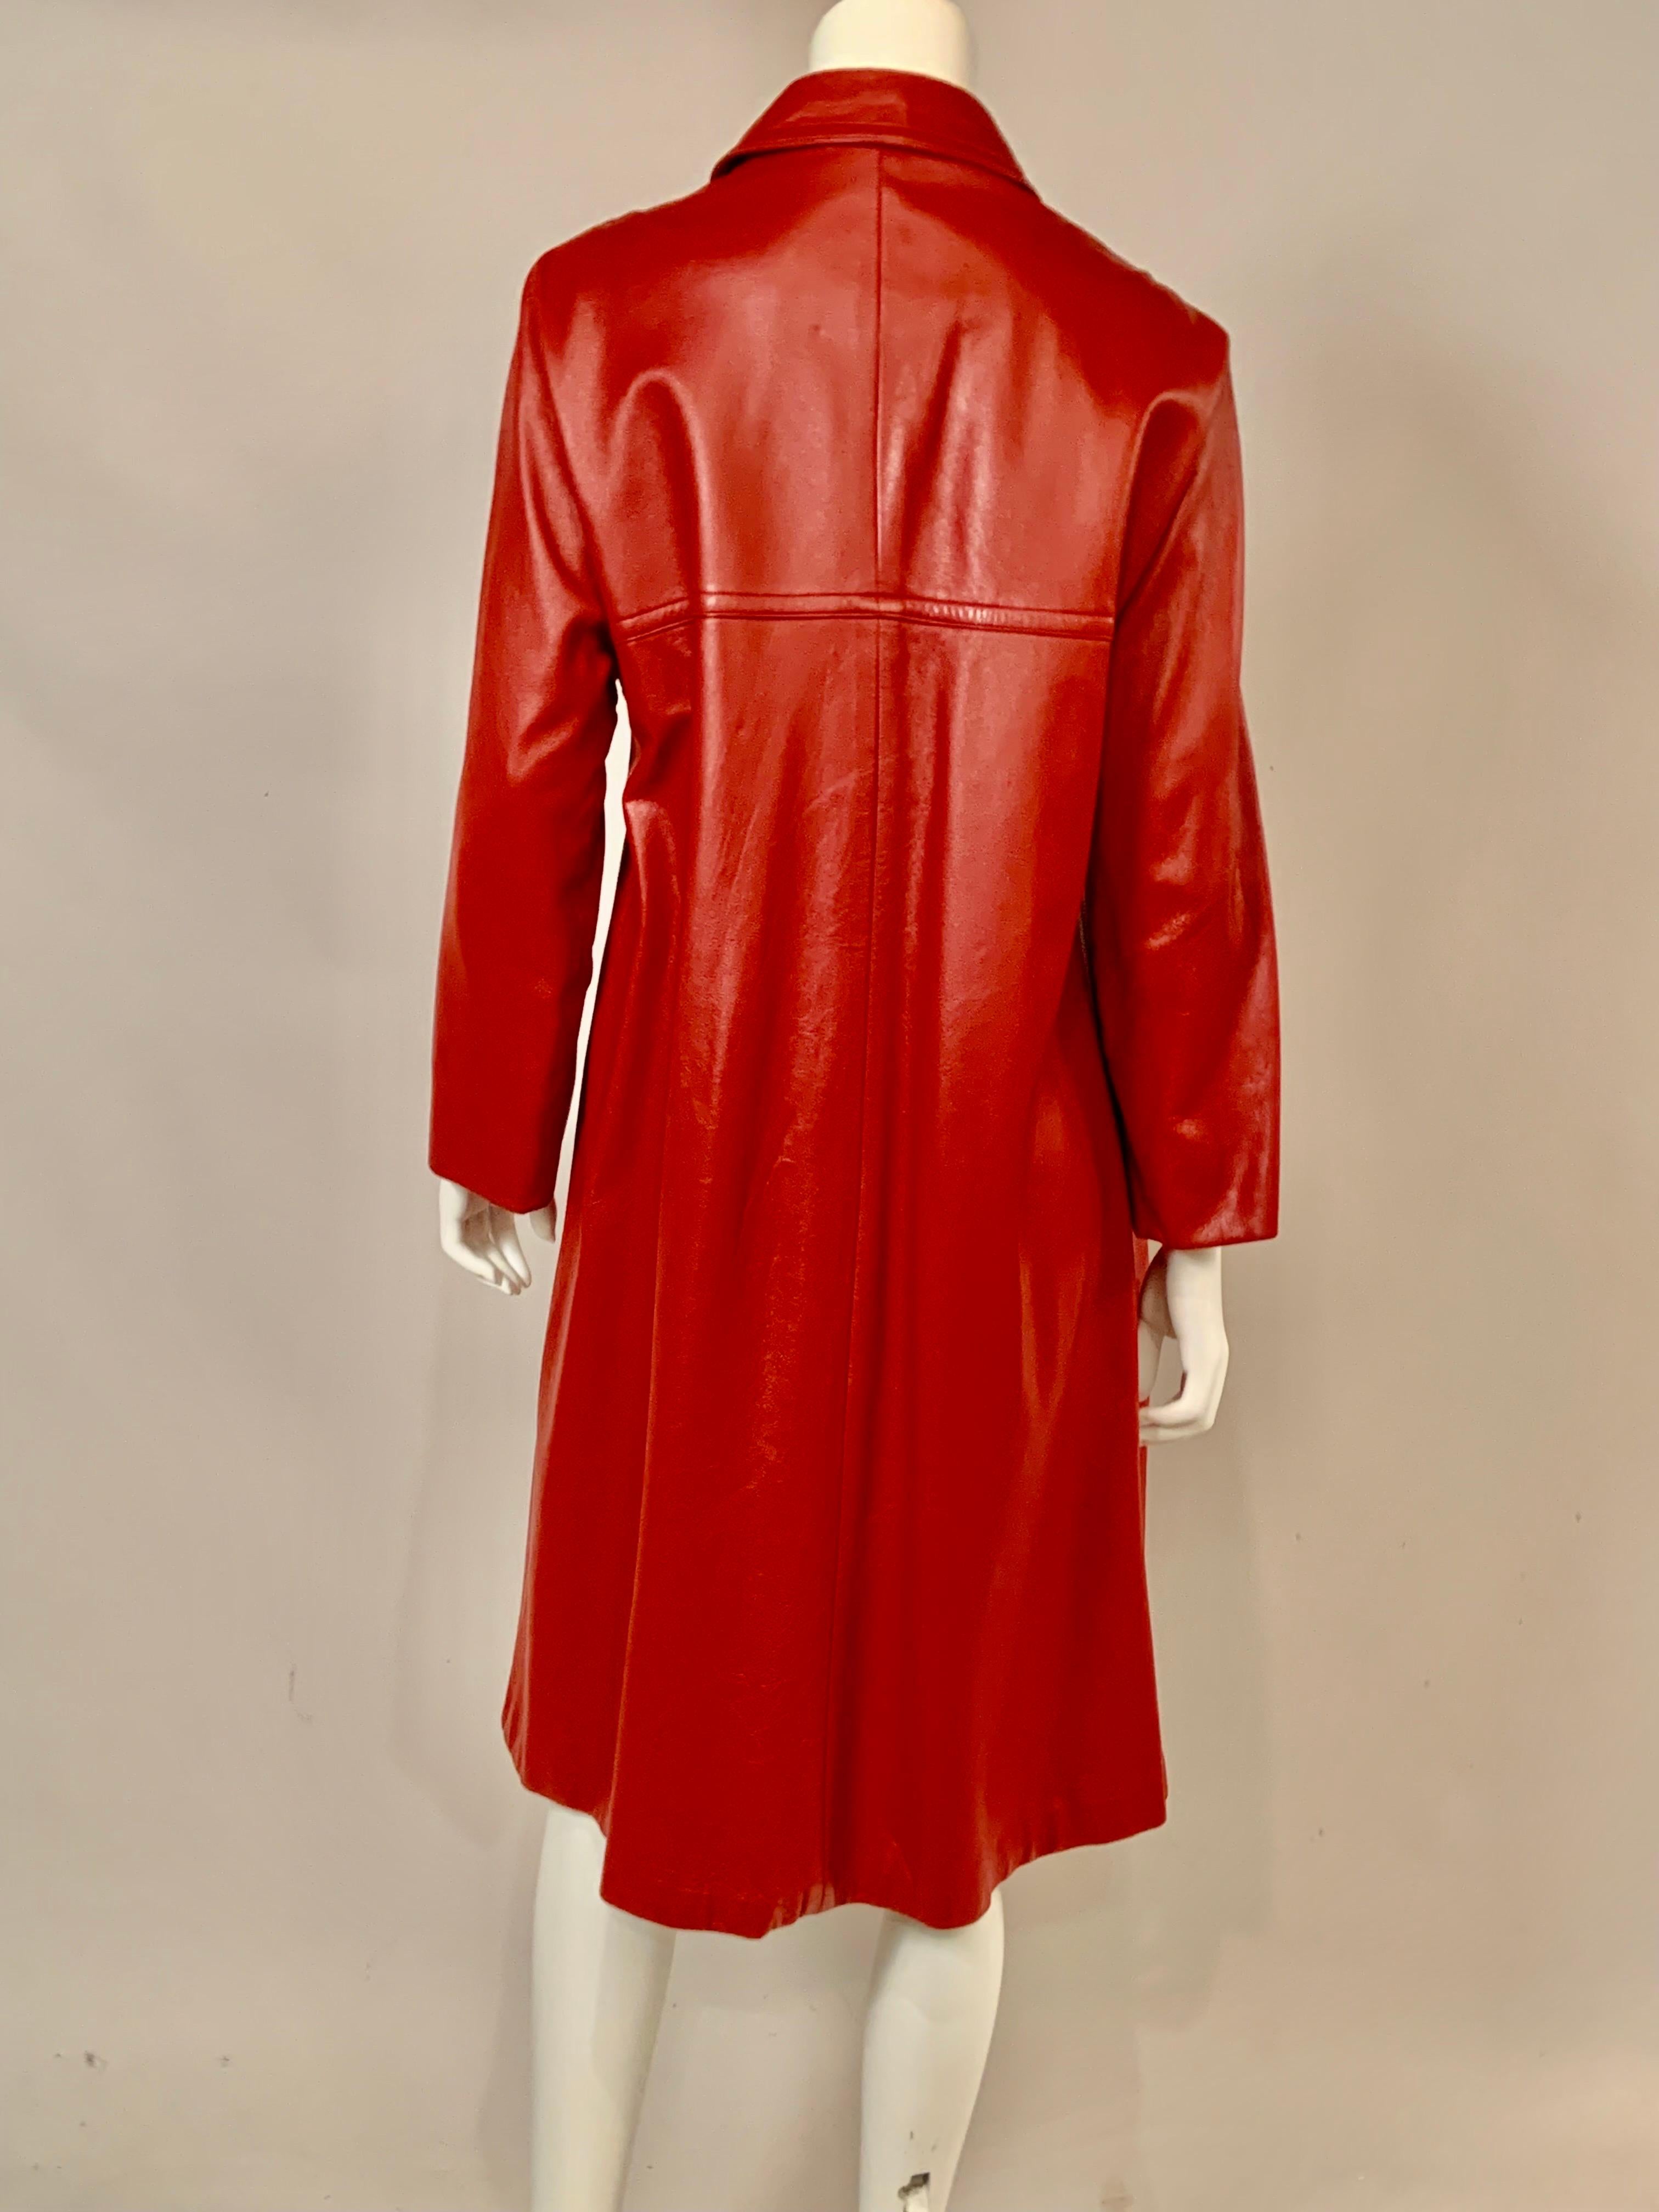 Bonnie Cashin for Sills Red Leather Coat with Brass Toggle Closures For Sale 6